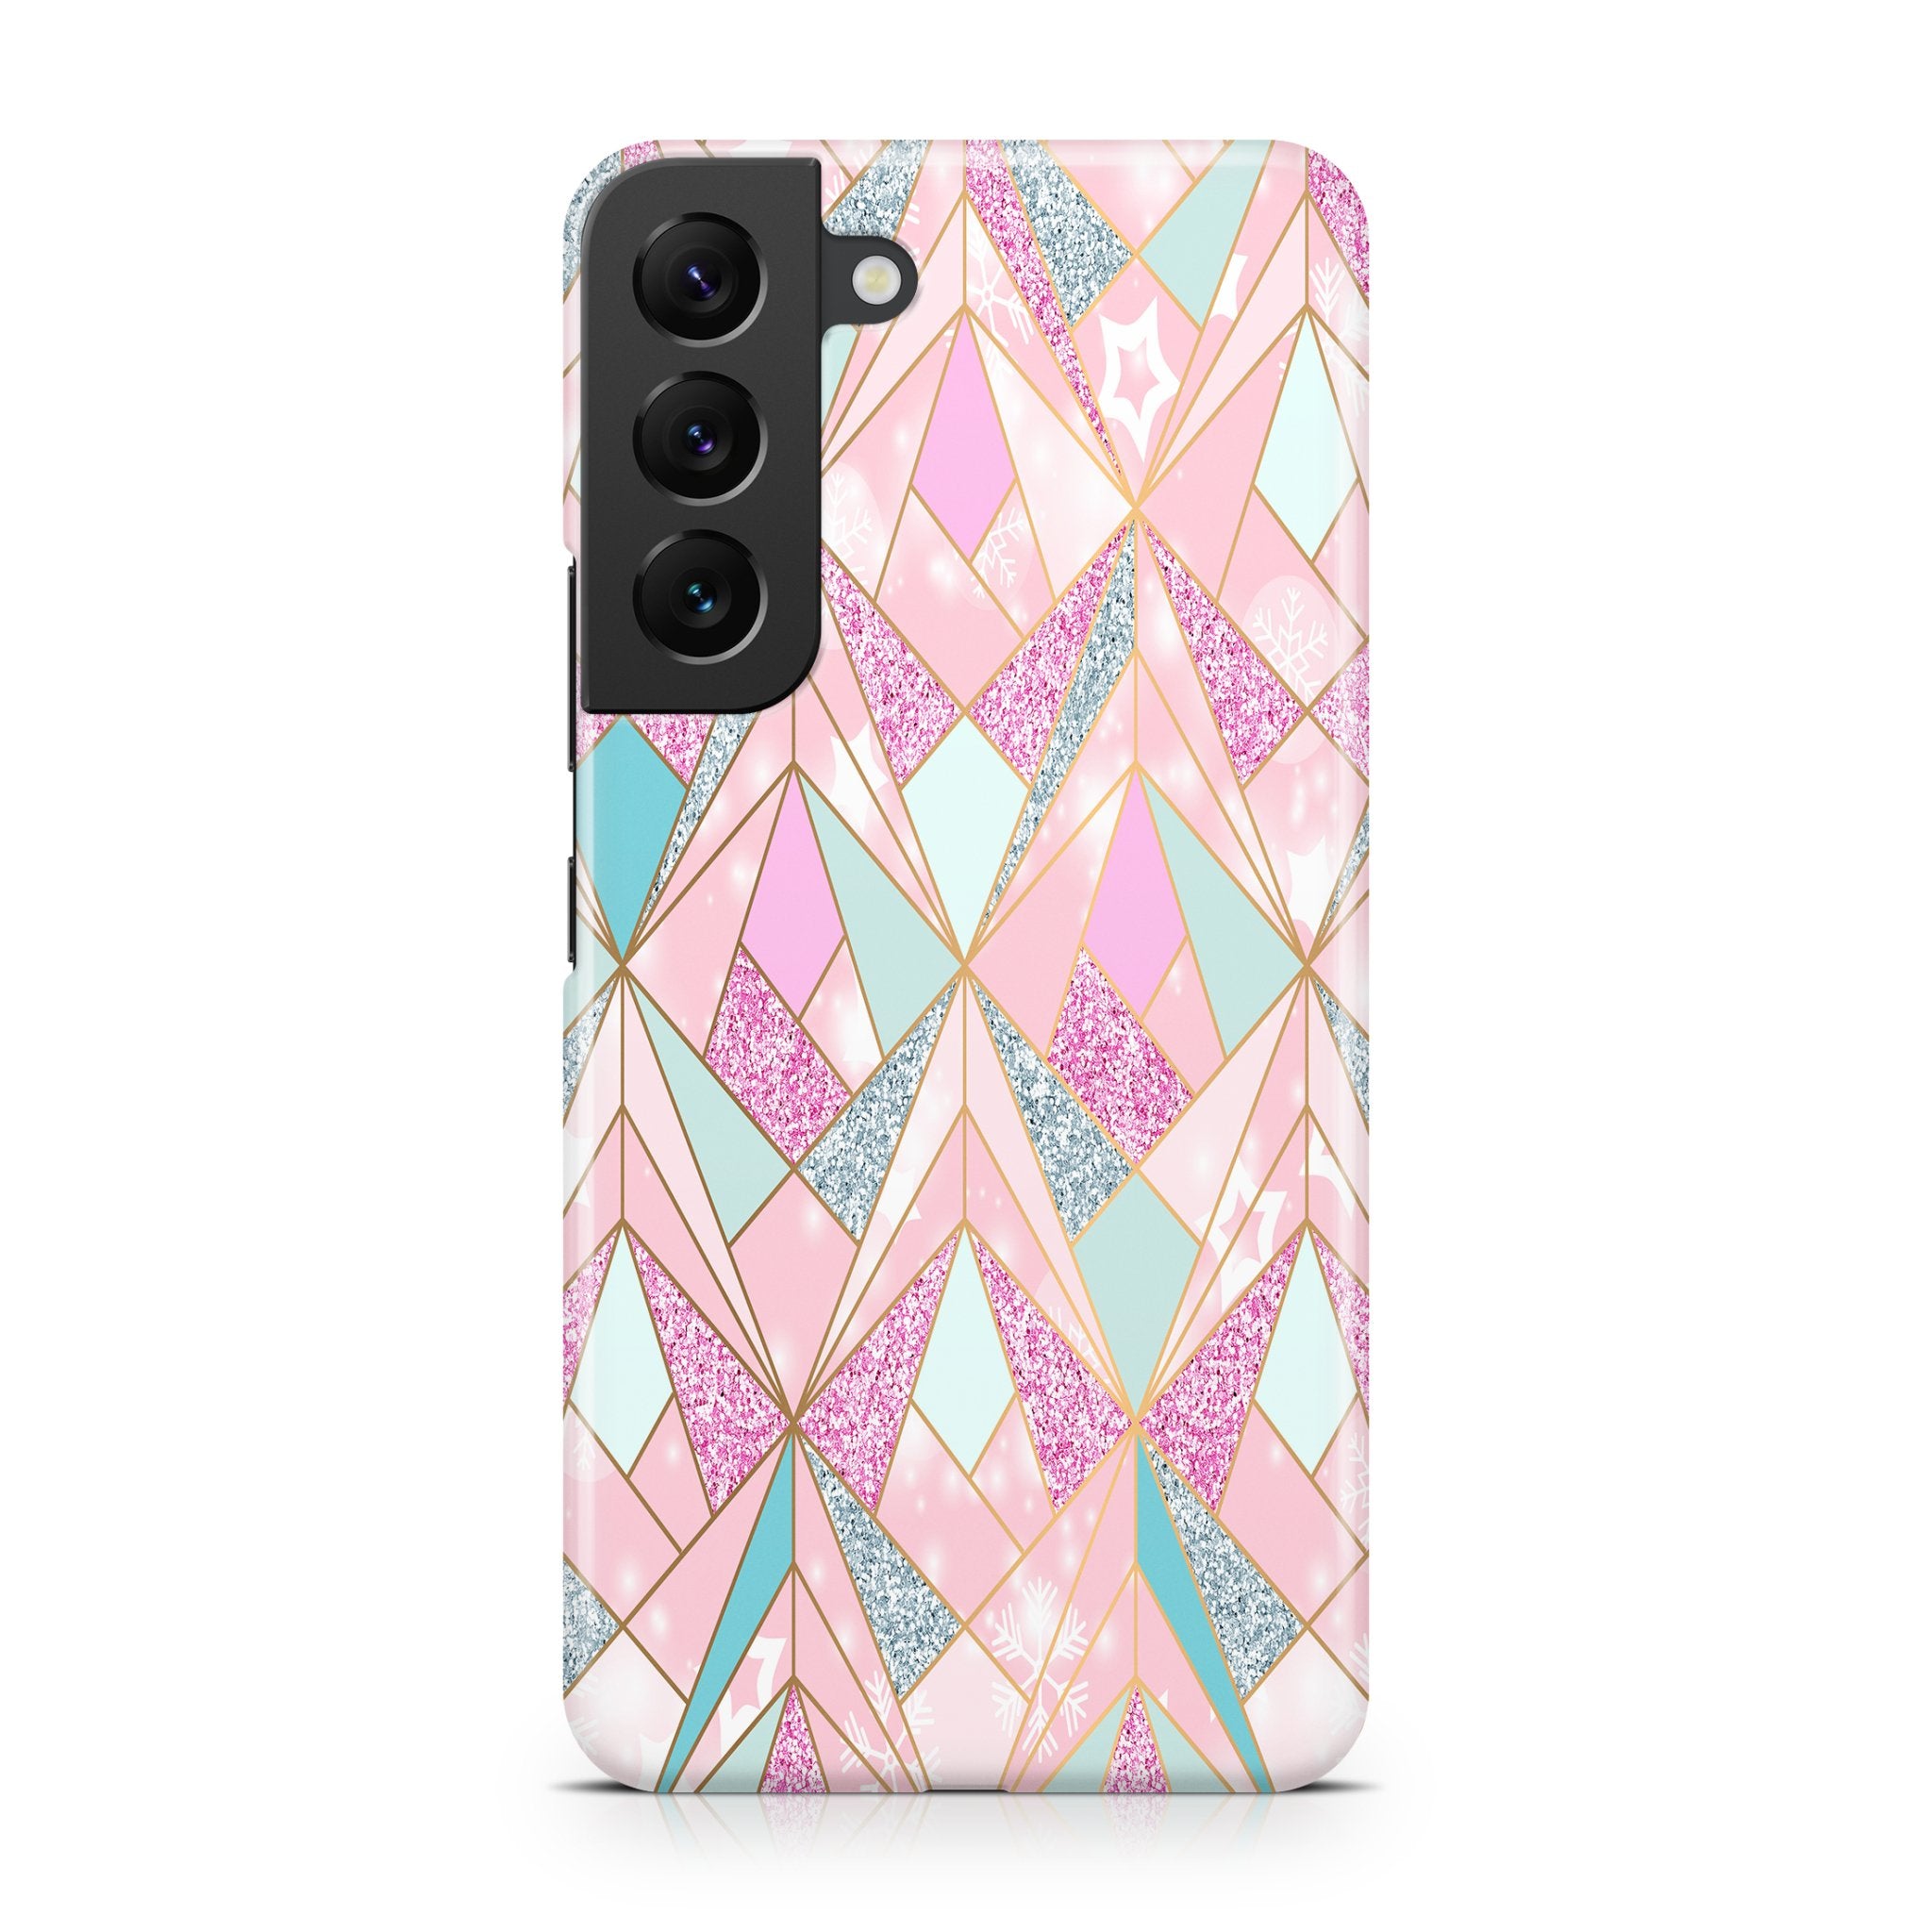 Geometric Winter - Samsung phone case designs by CaseSwagger